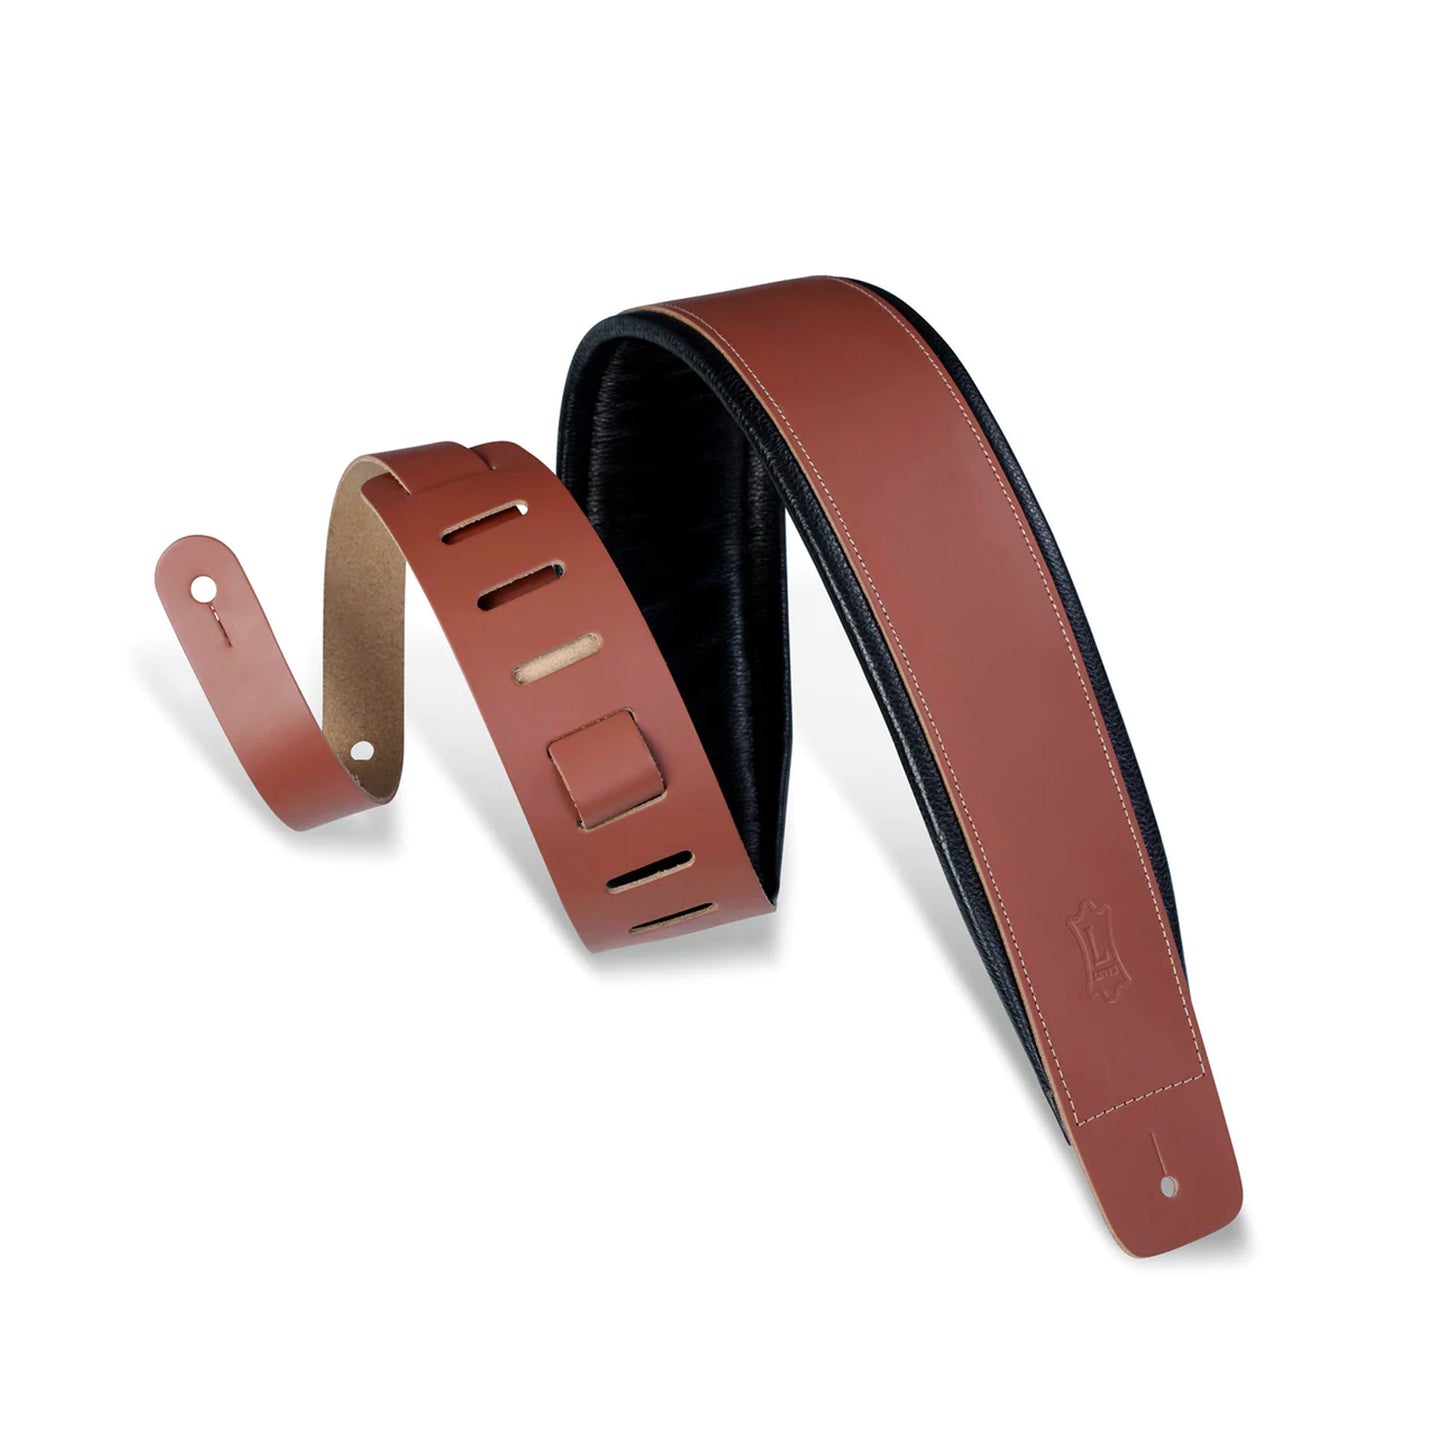 Levy's Leathers - DM1PD-WAL - 3" Wide Walnut Genuine Leather Guitar Strap